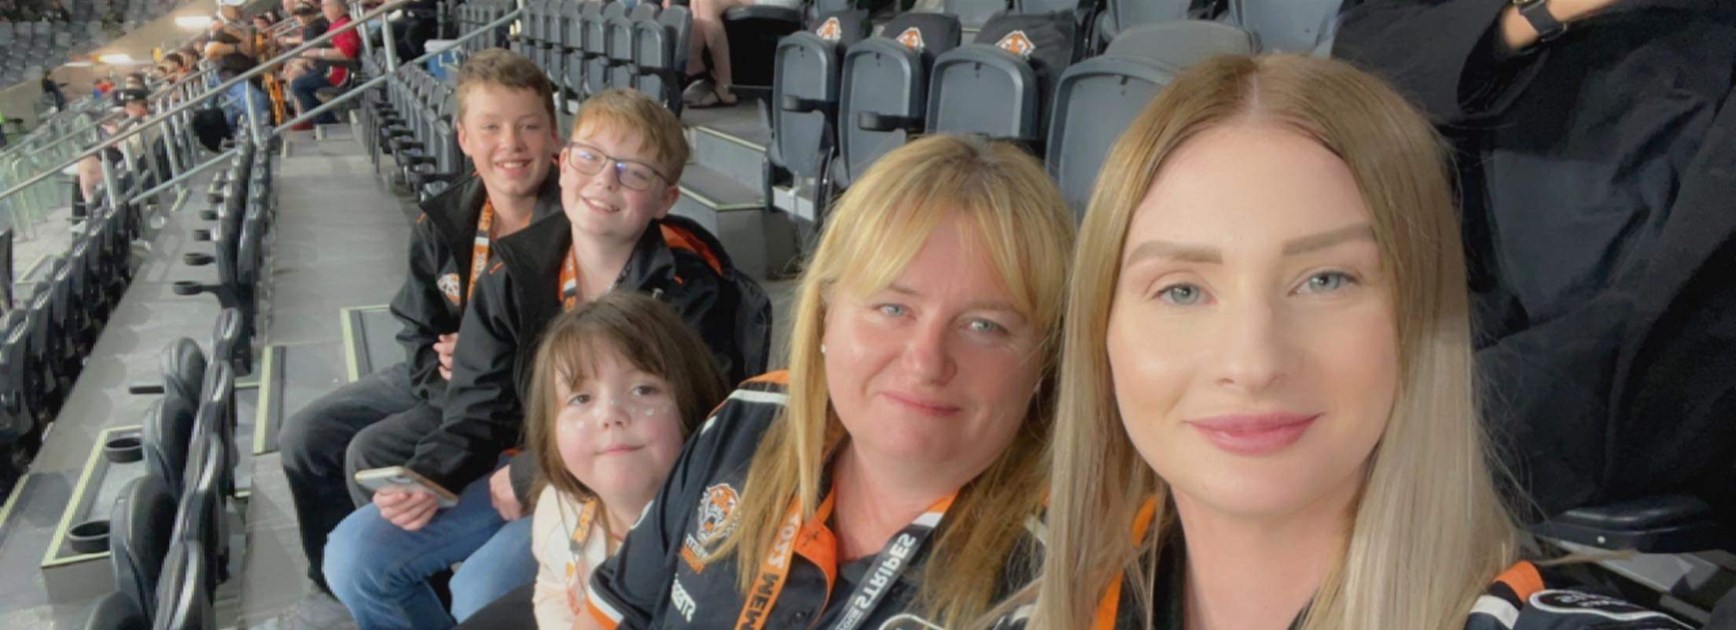 Christina and niece Amy with other family members at CommBank Stadium.